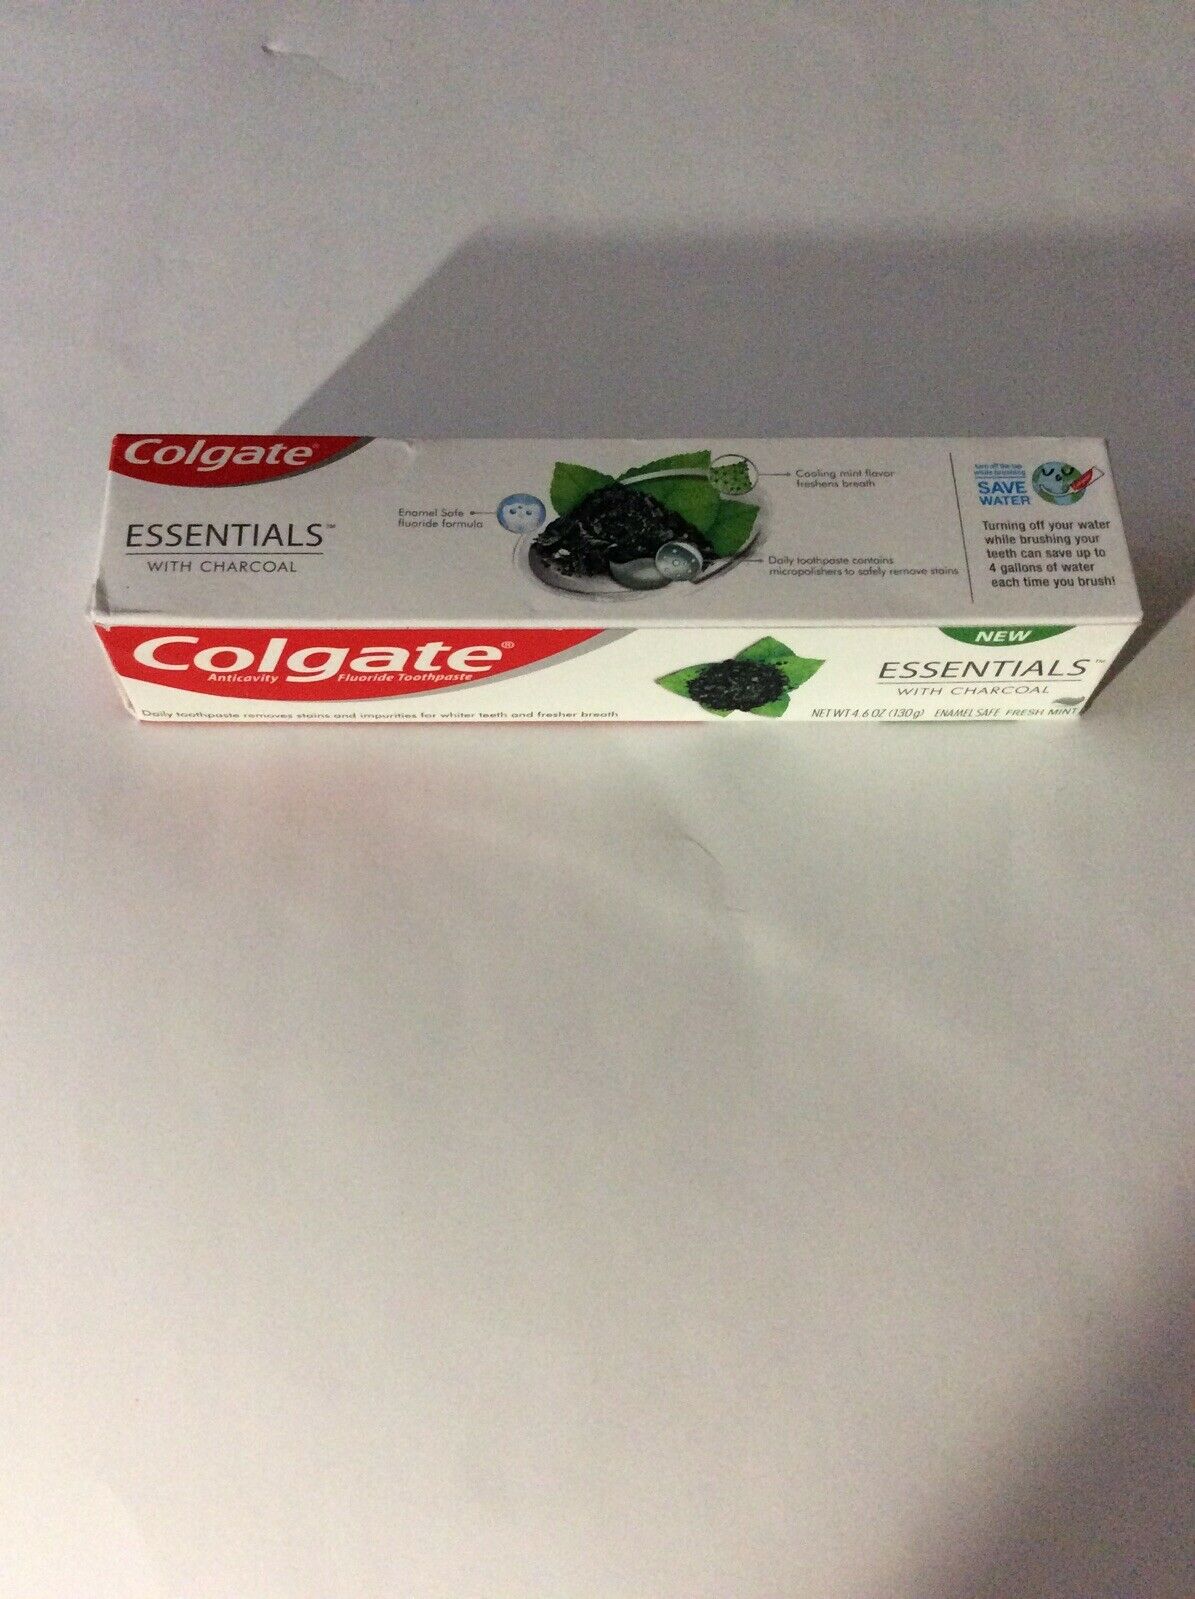 New Colgate Essentials with Charcoal fresh mint 4.6 oz